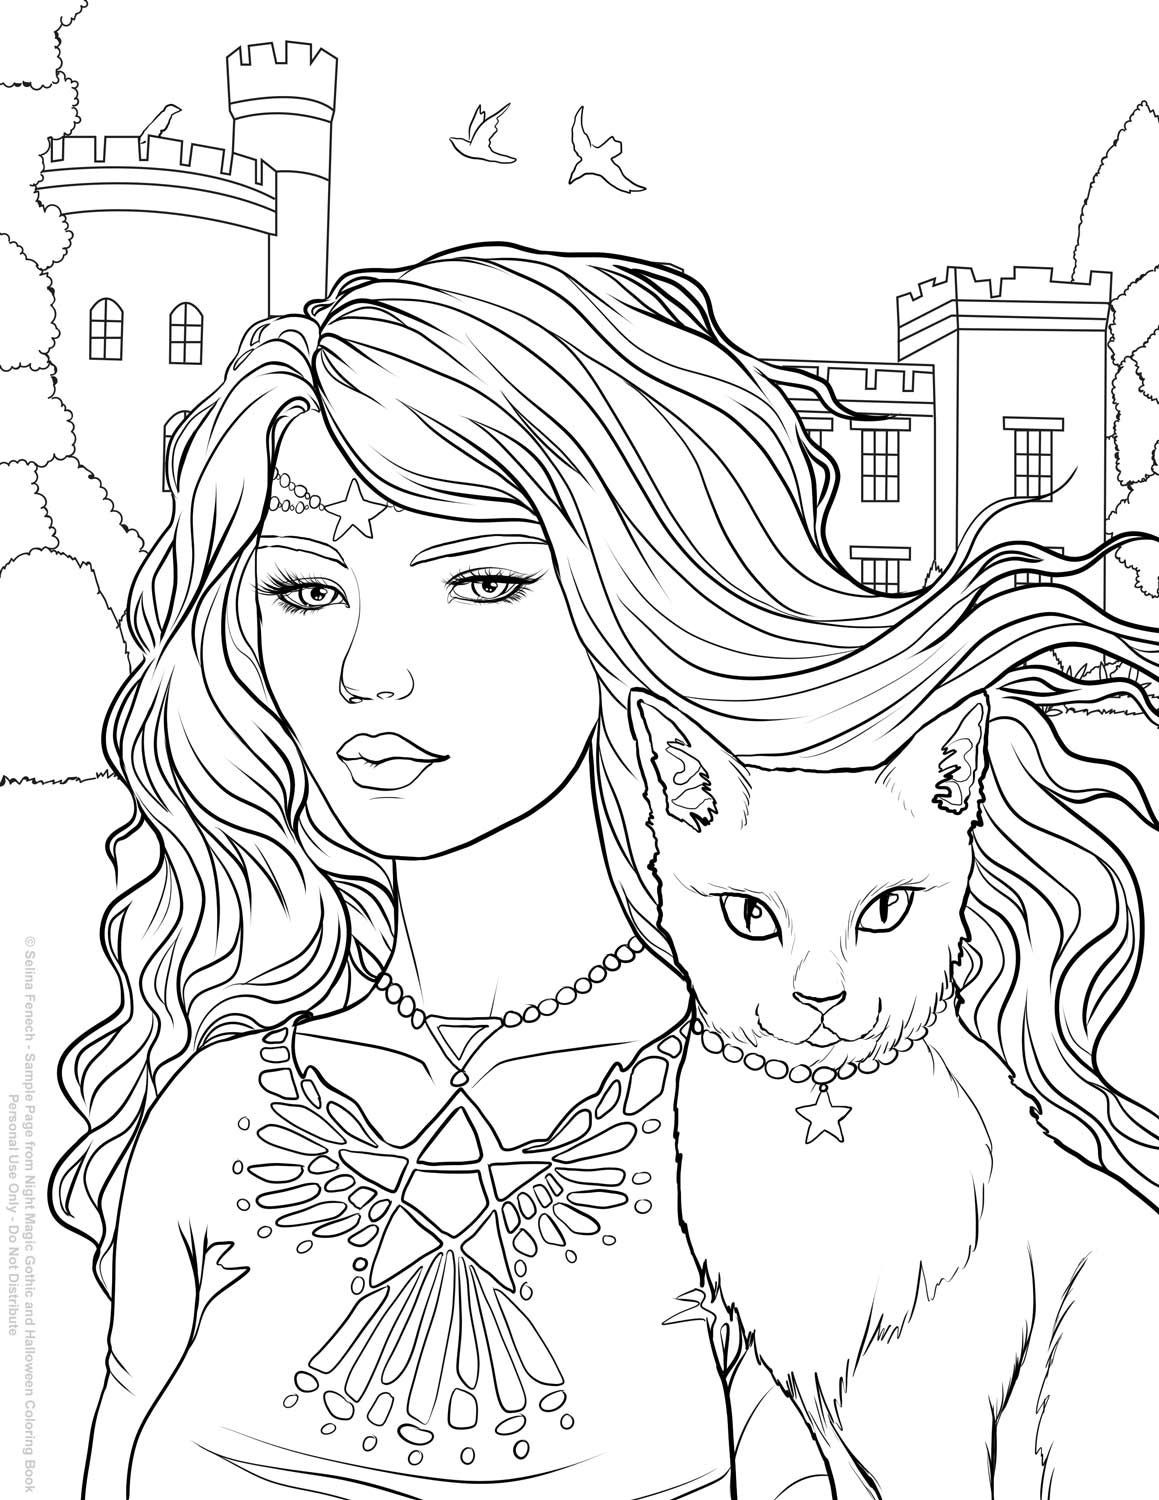 Free Printable Coloring Pages For Adults Sexy Coloring Pages